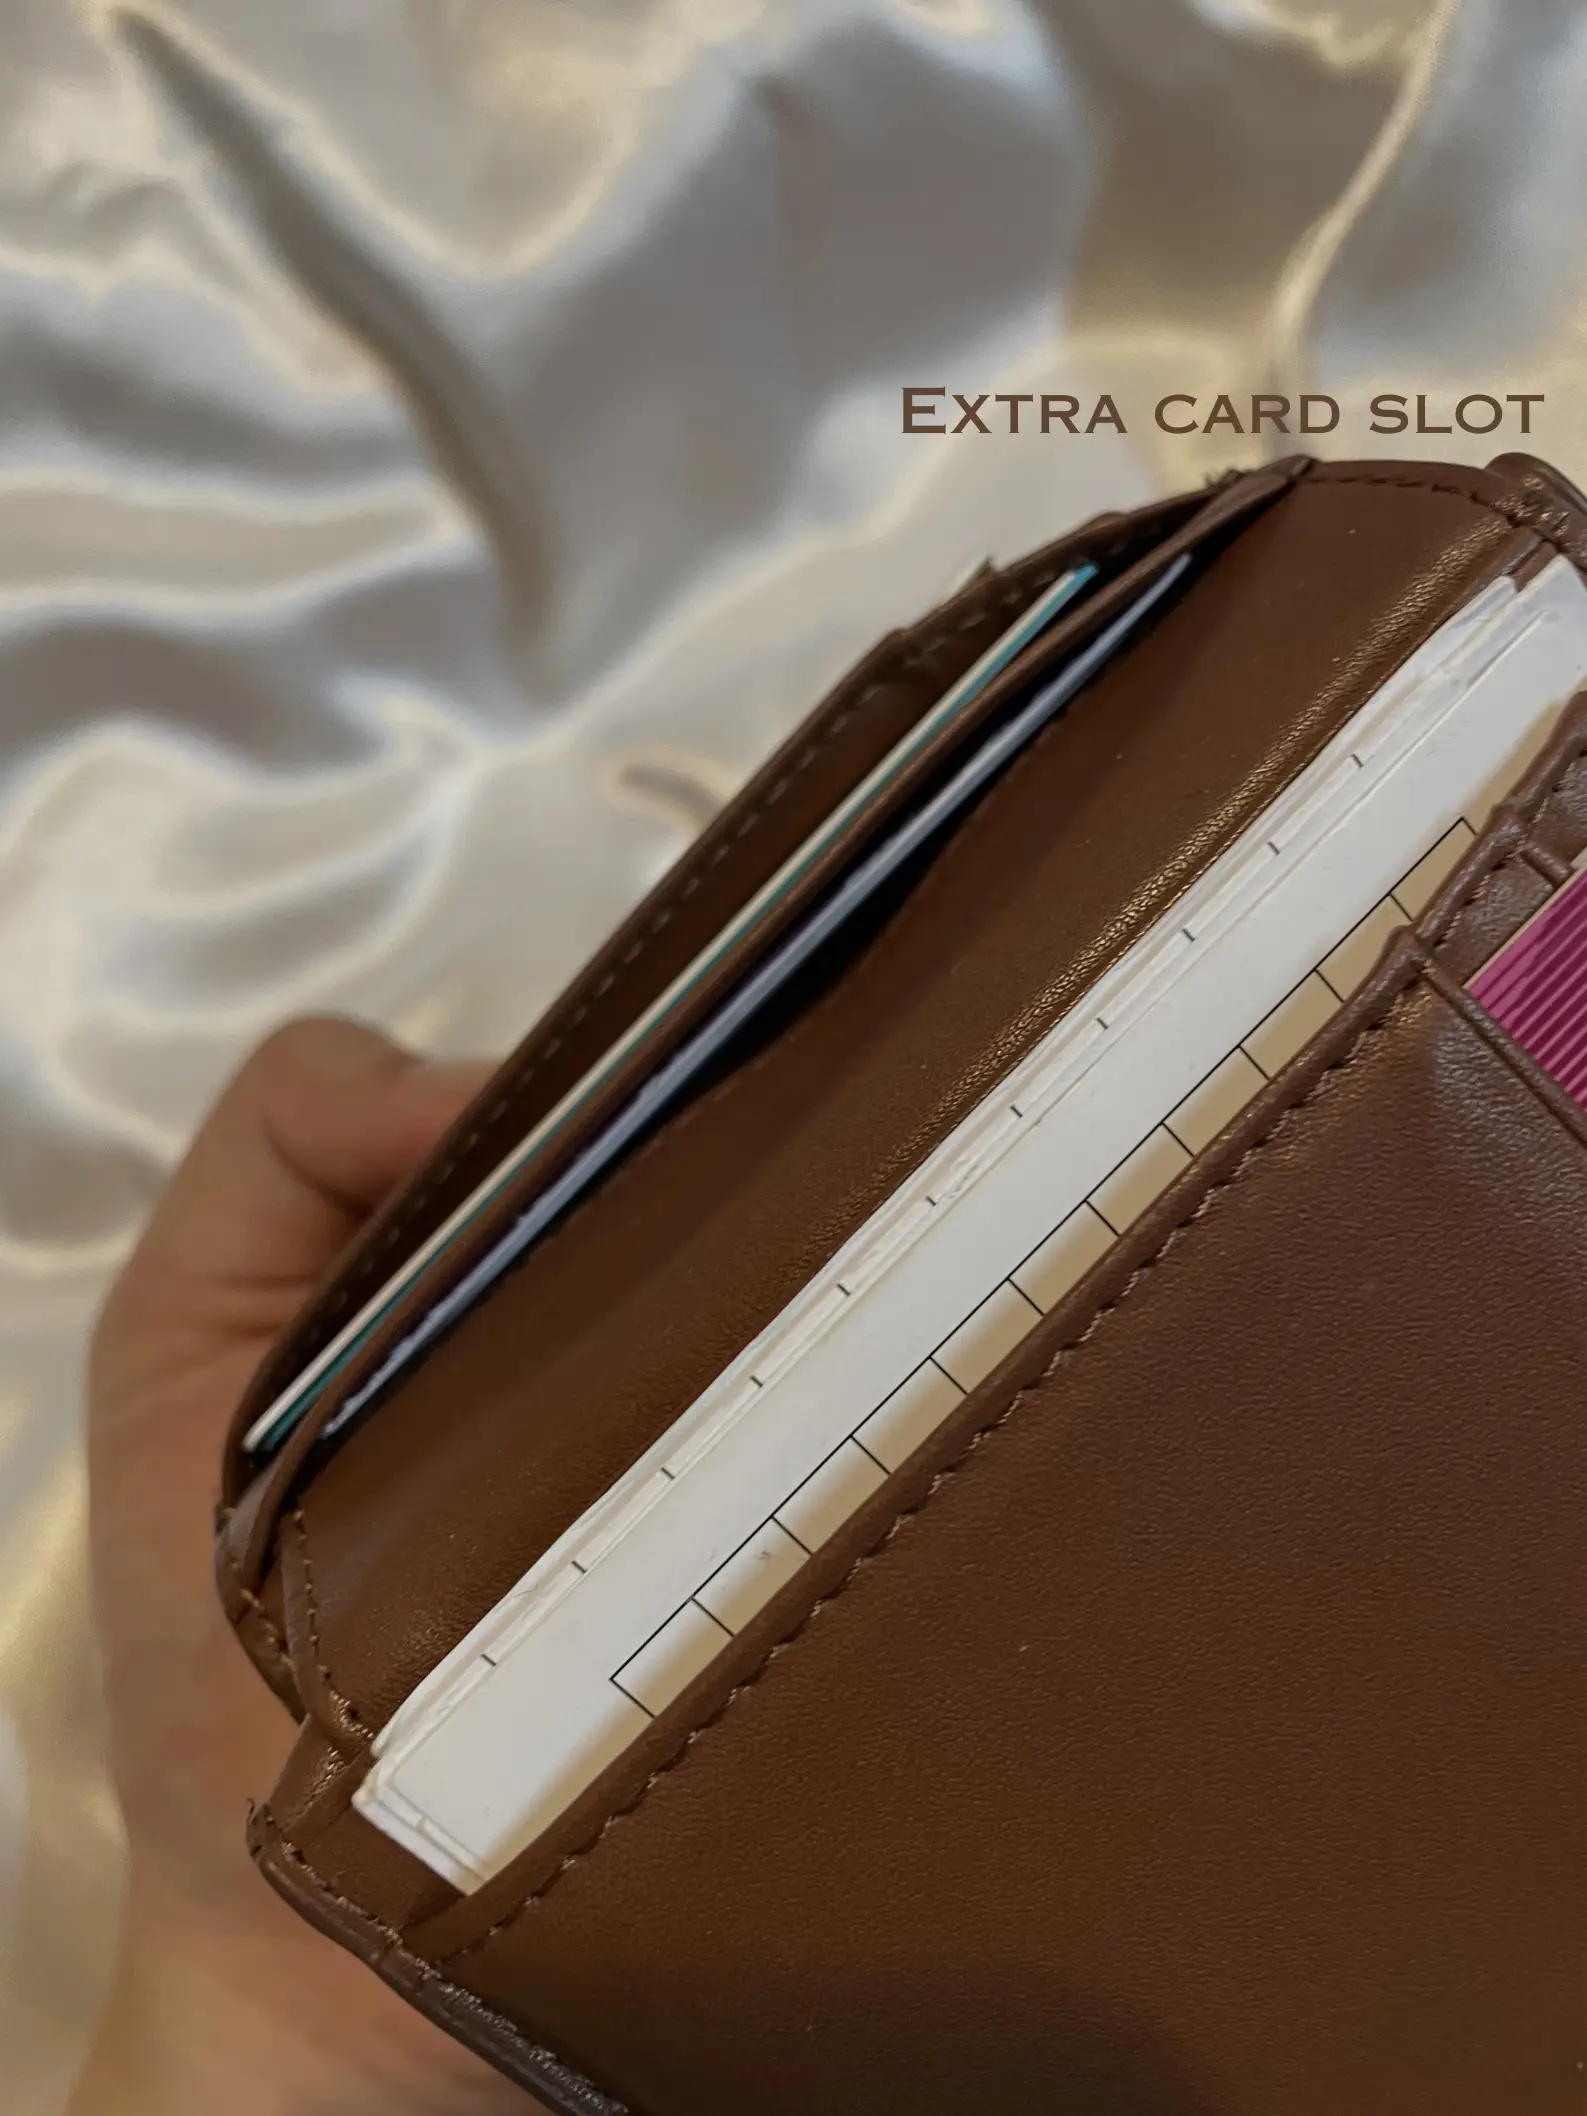 CLN - The Zahara Wallet will fit right into your pocket.